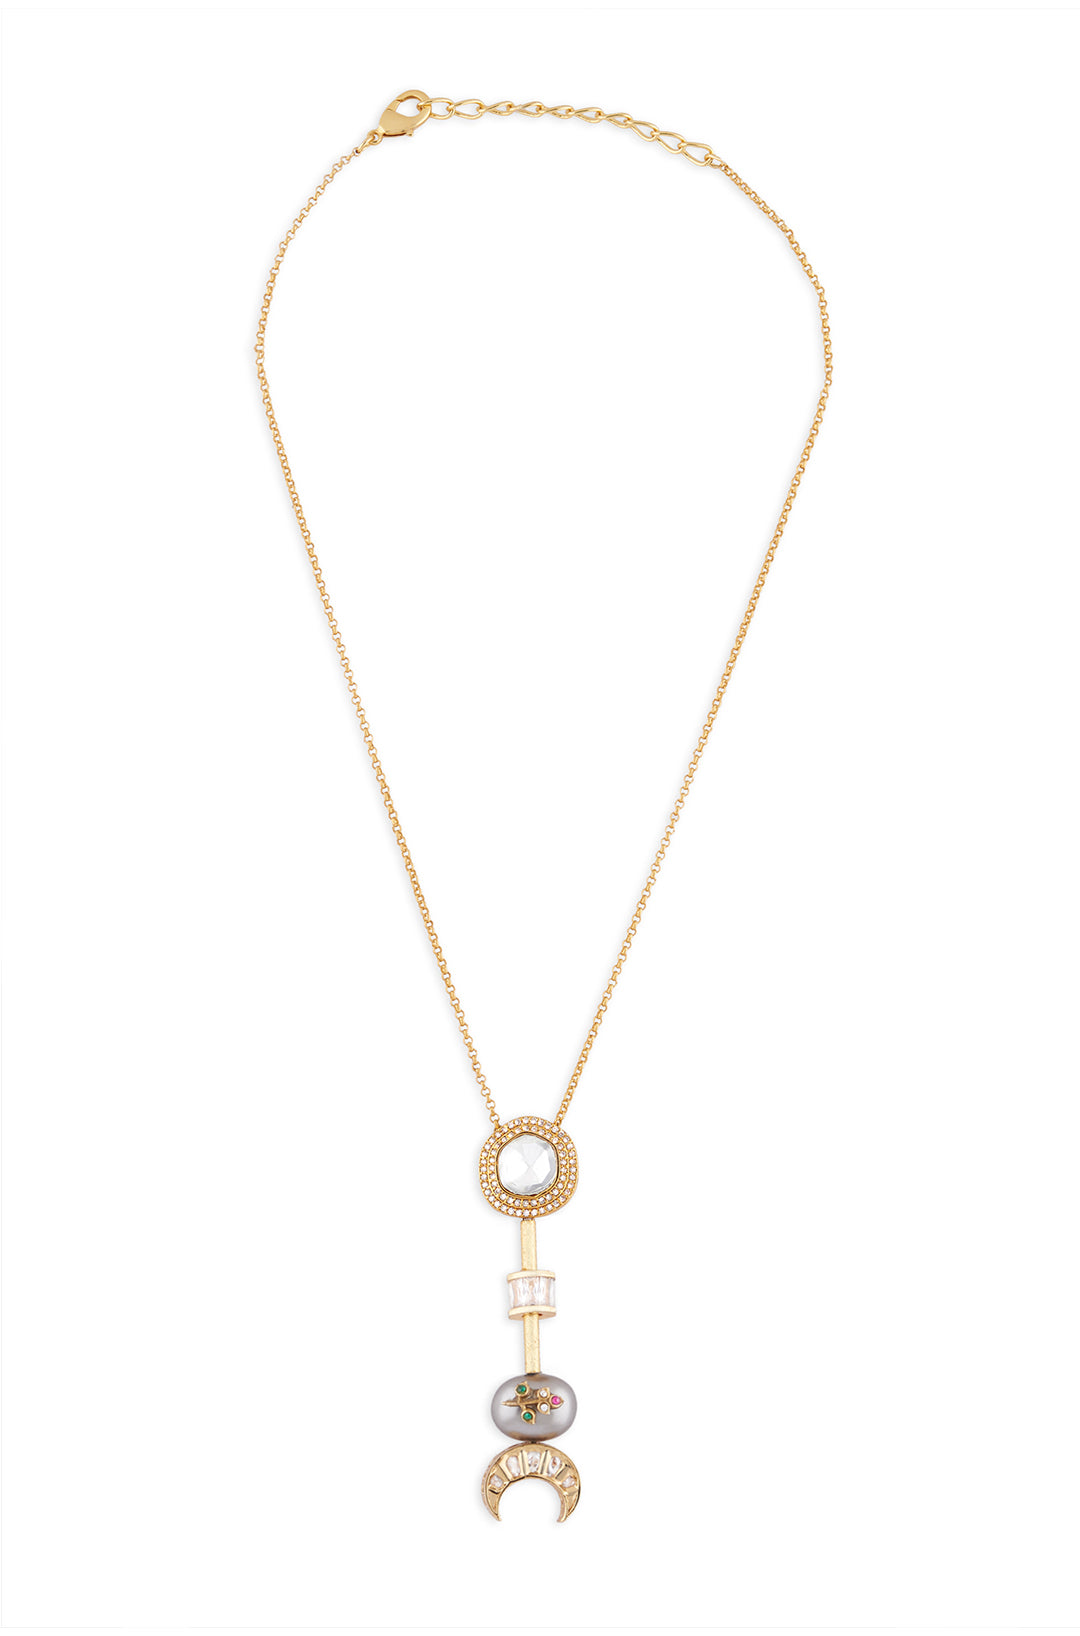 Gold Tone Polki Long Necklace - Joules by Radhika